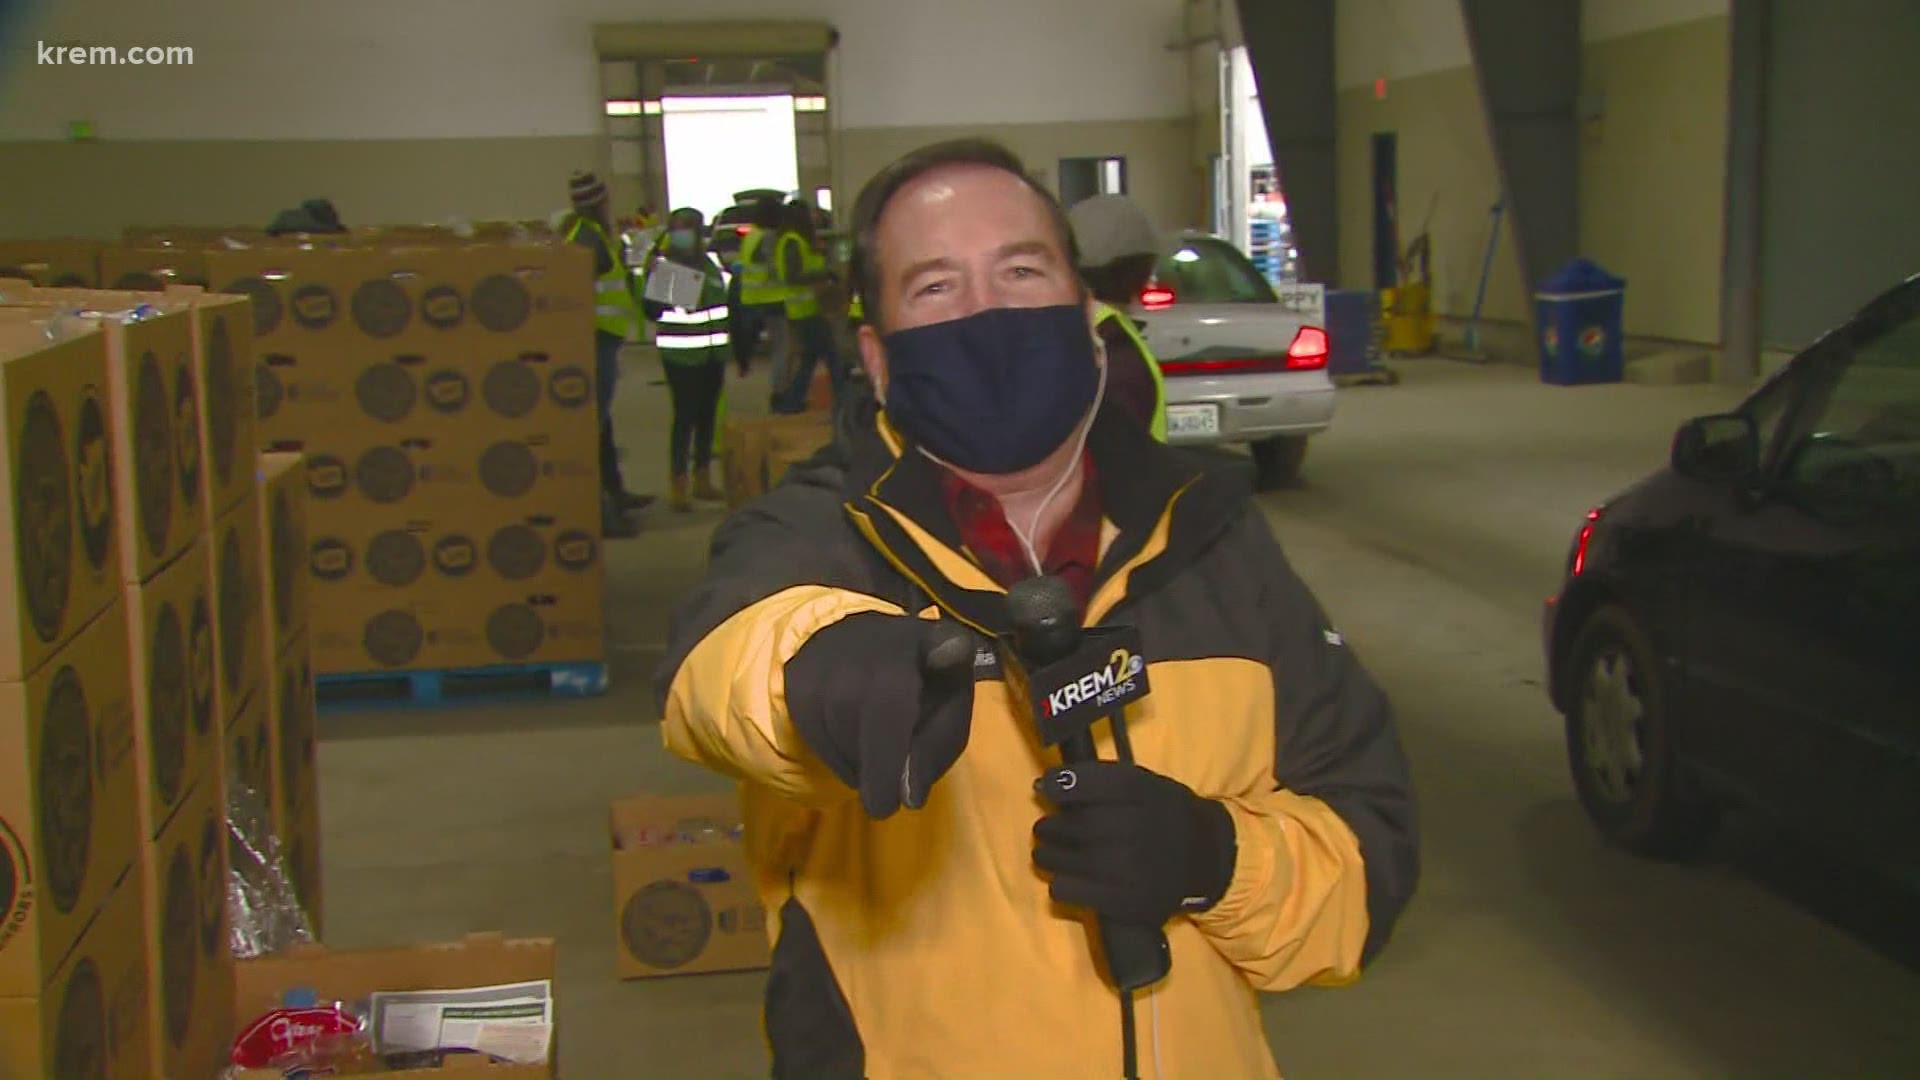 Tom's Turkey Drive is aiming to feed 11 thousand families amid the COVID-19 Pandemic.